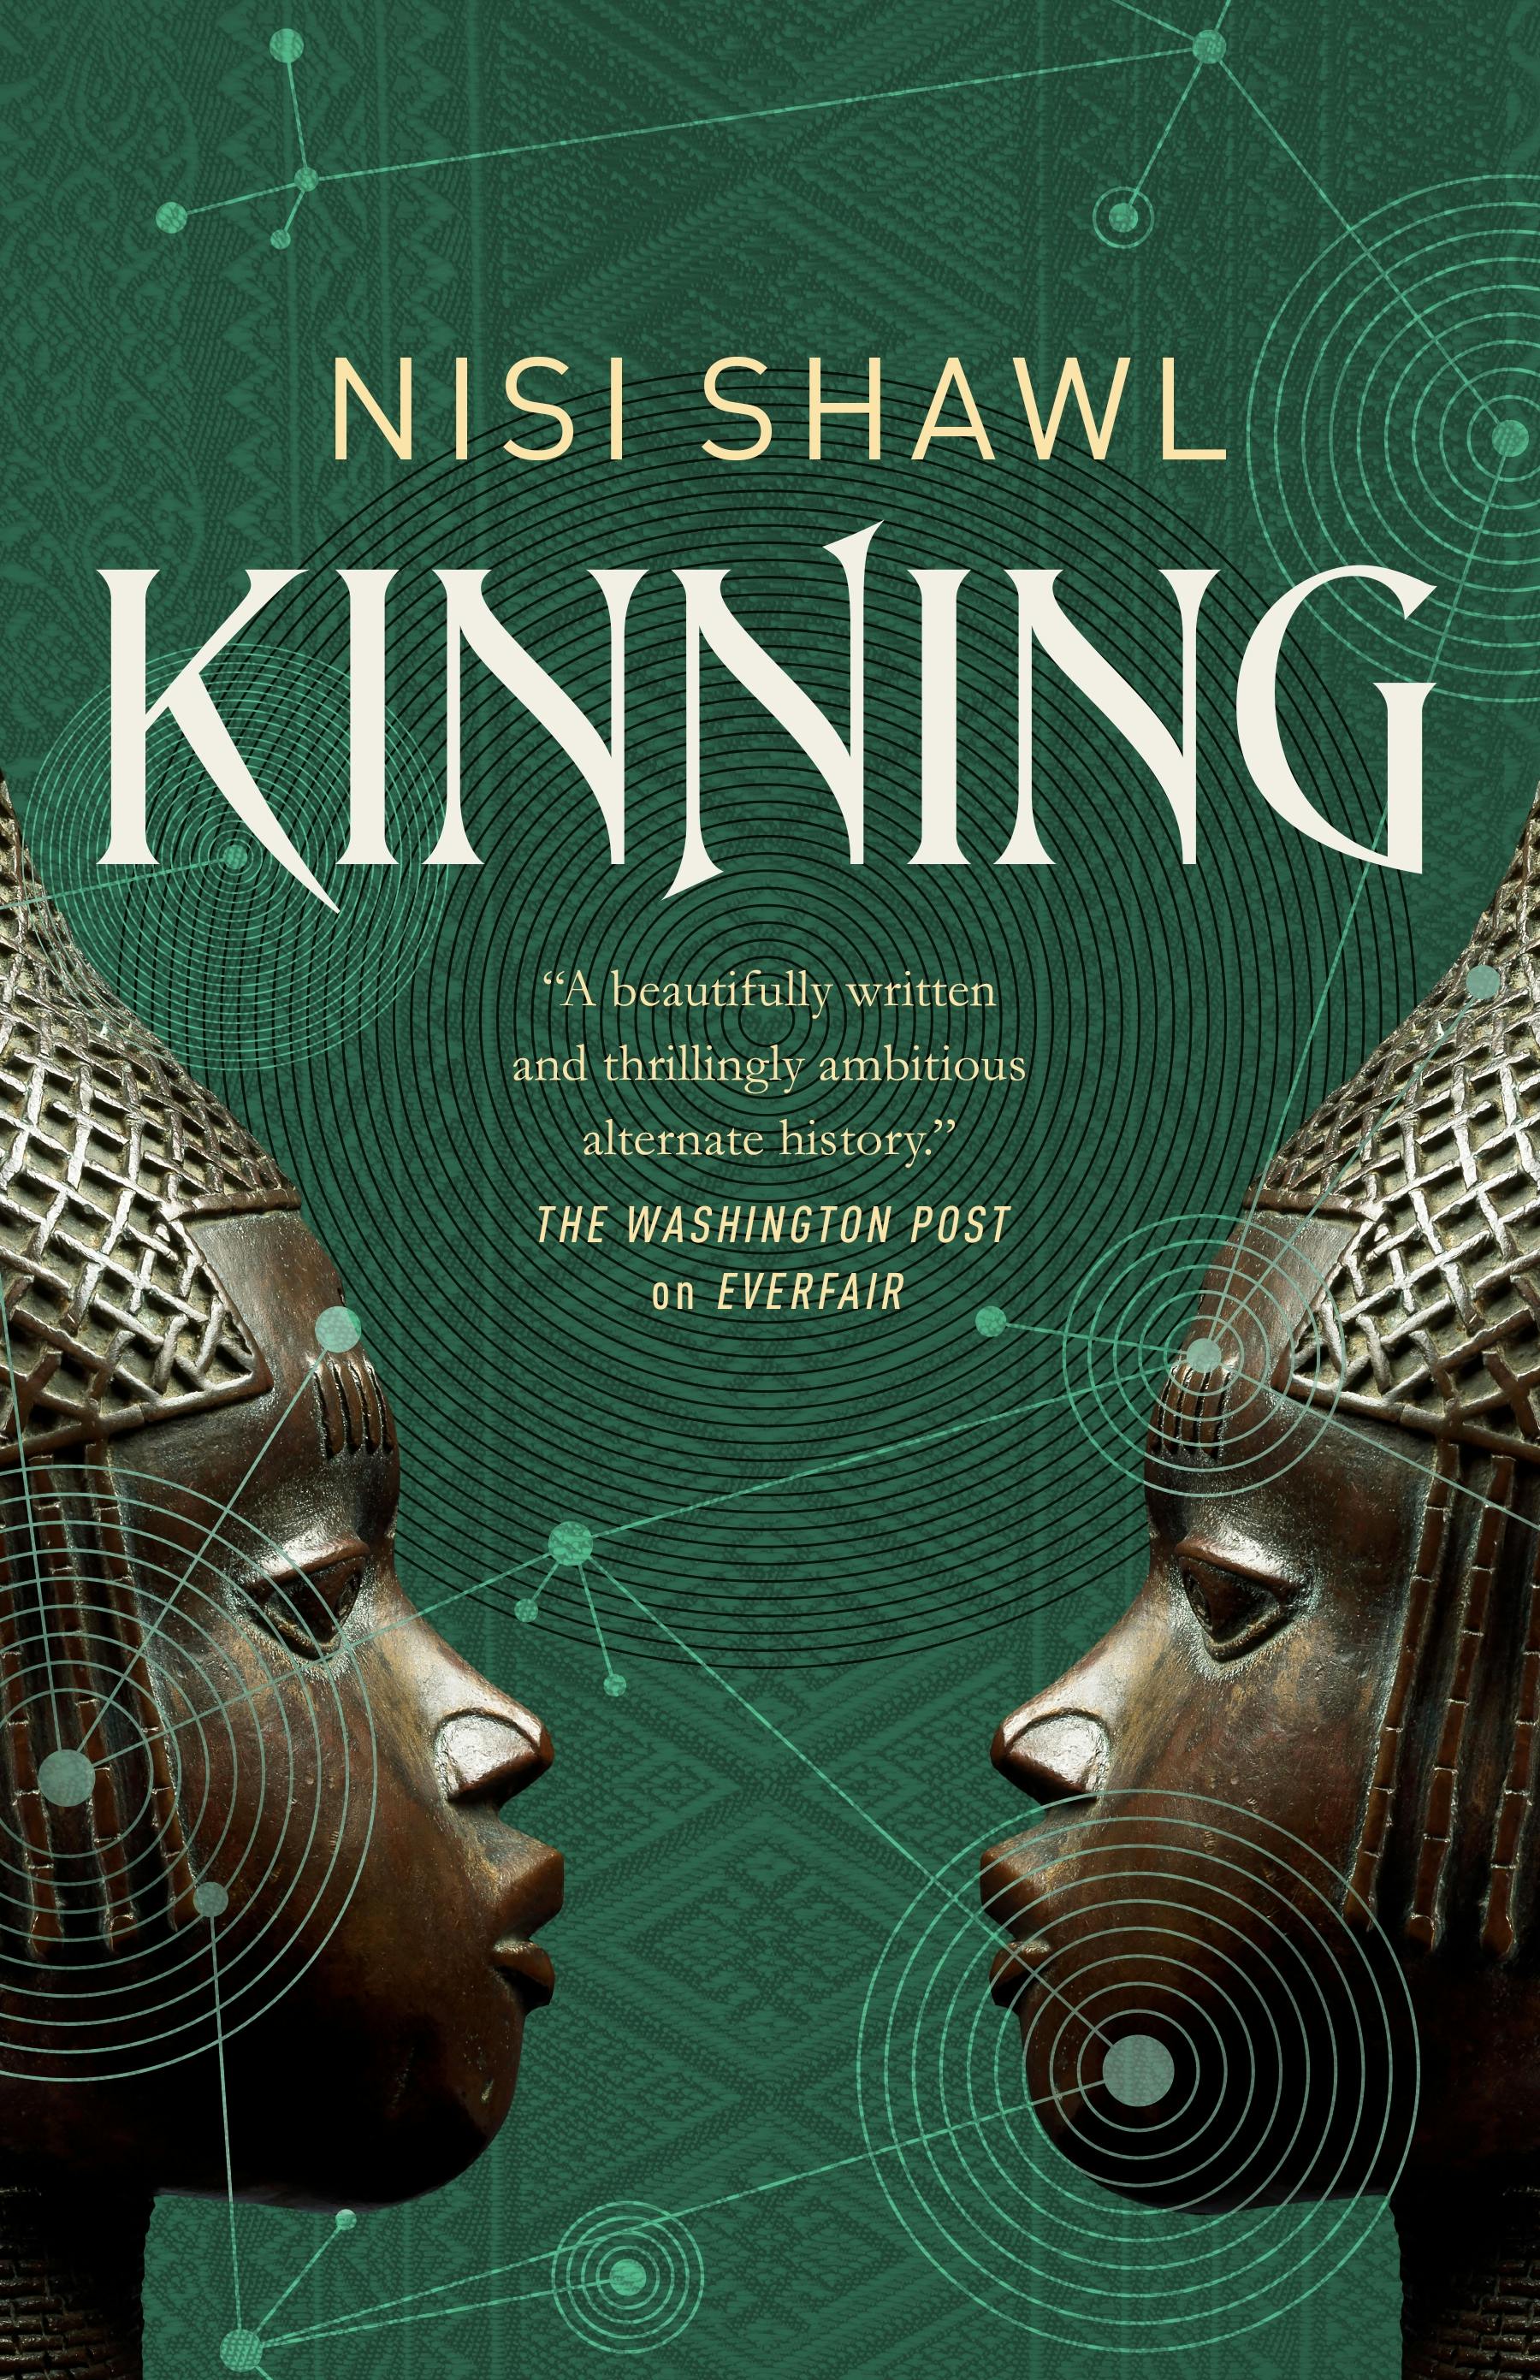 Cover for the book titled as: Kinning